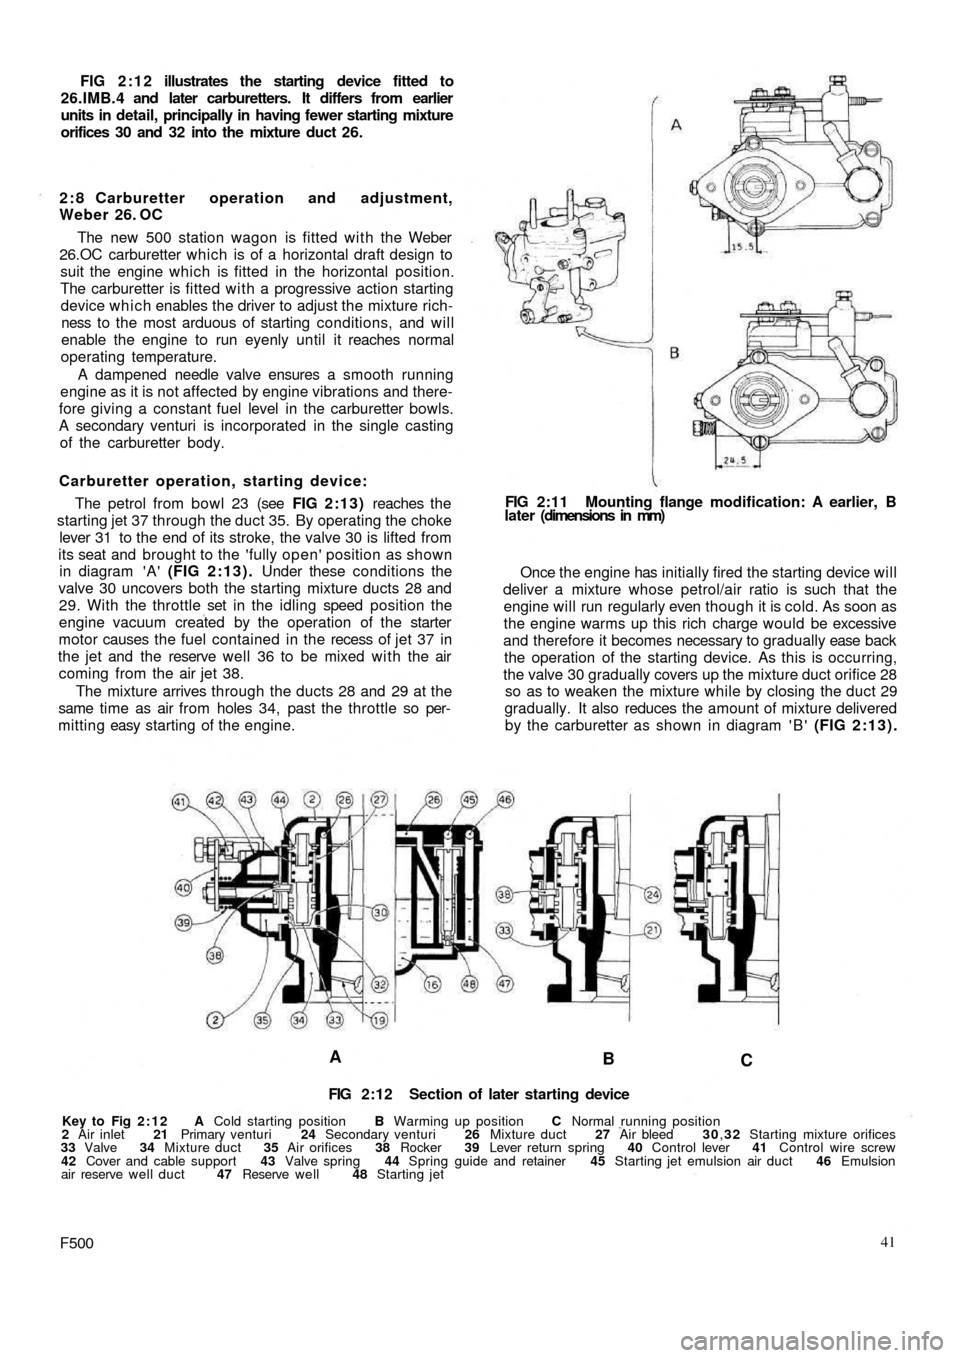 FIAT 500 1966 1.G Workshop Manual FIG 2:12 illustrates the starting device fitted to
26.IMB.4 and later carburetters. It differs from earlier
units in detail, principally in having fewer starting mixture
orifices 30 and 32 into the mi